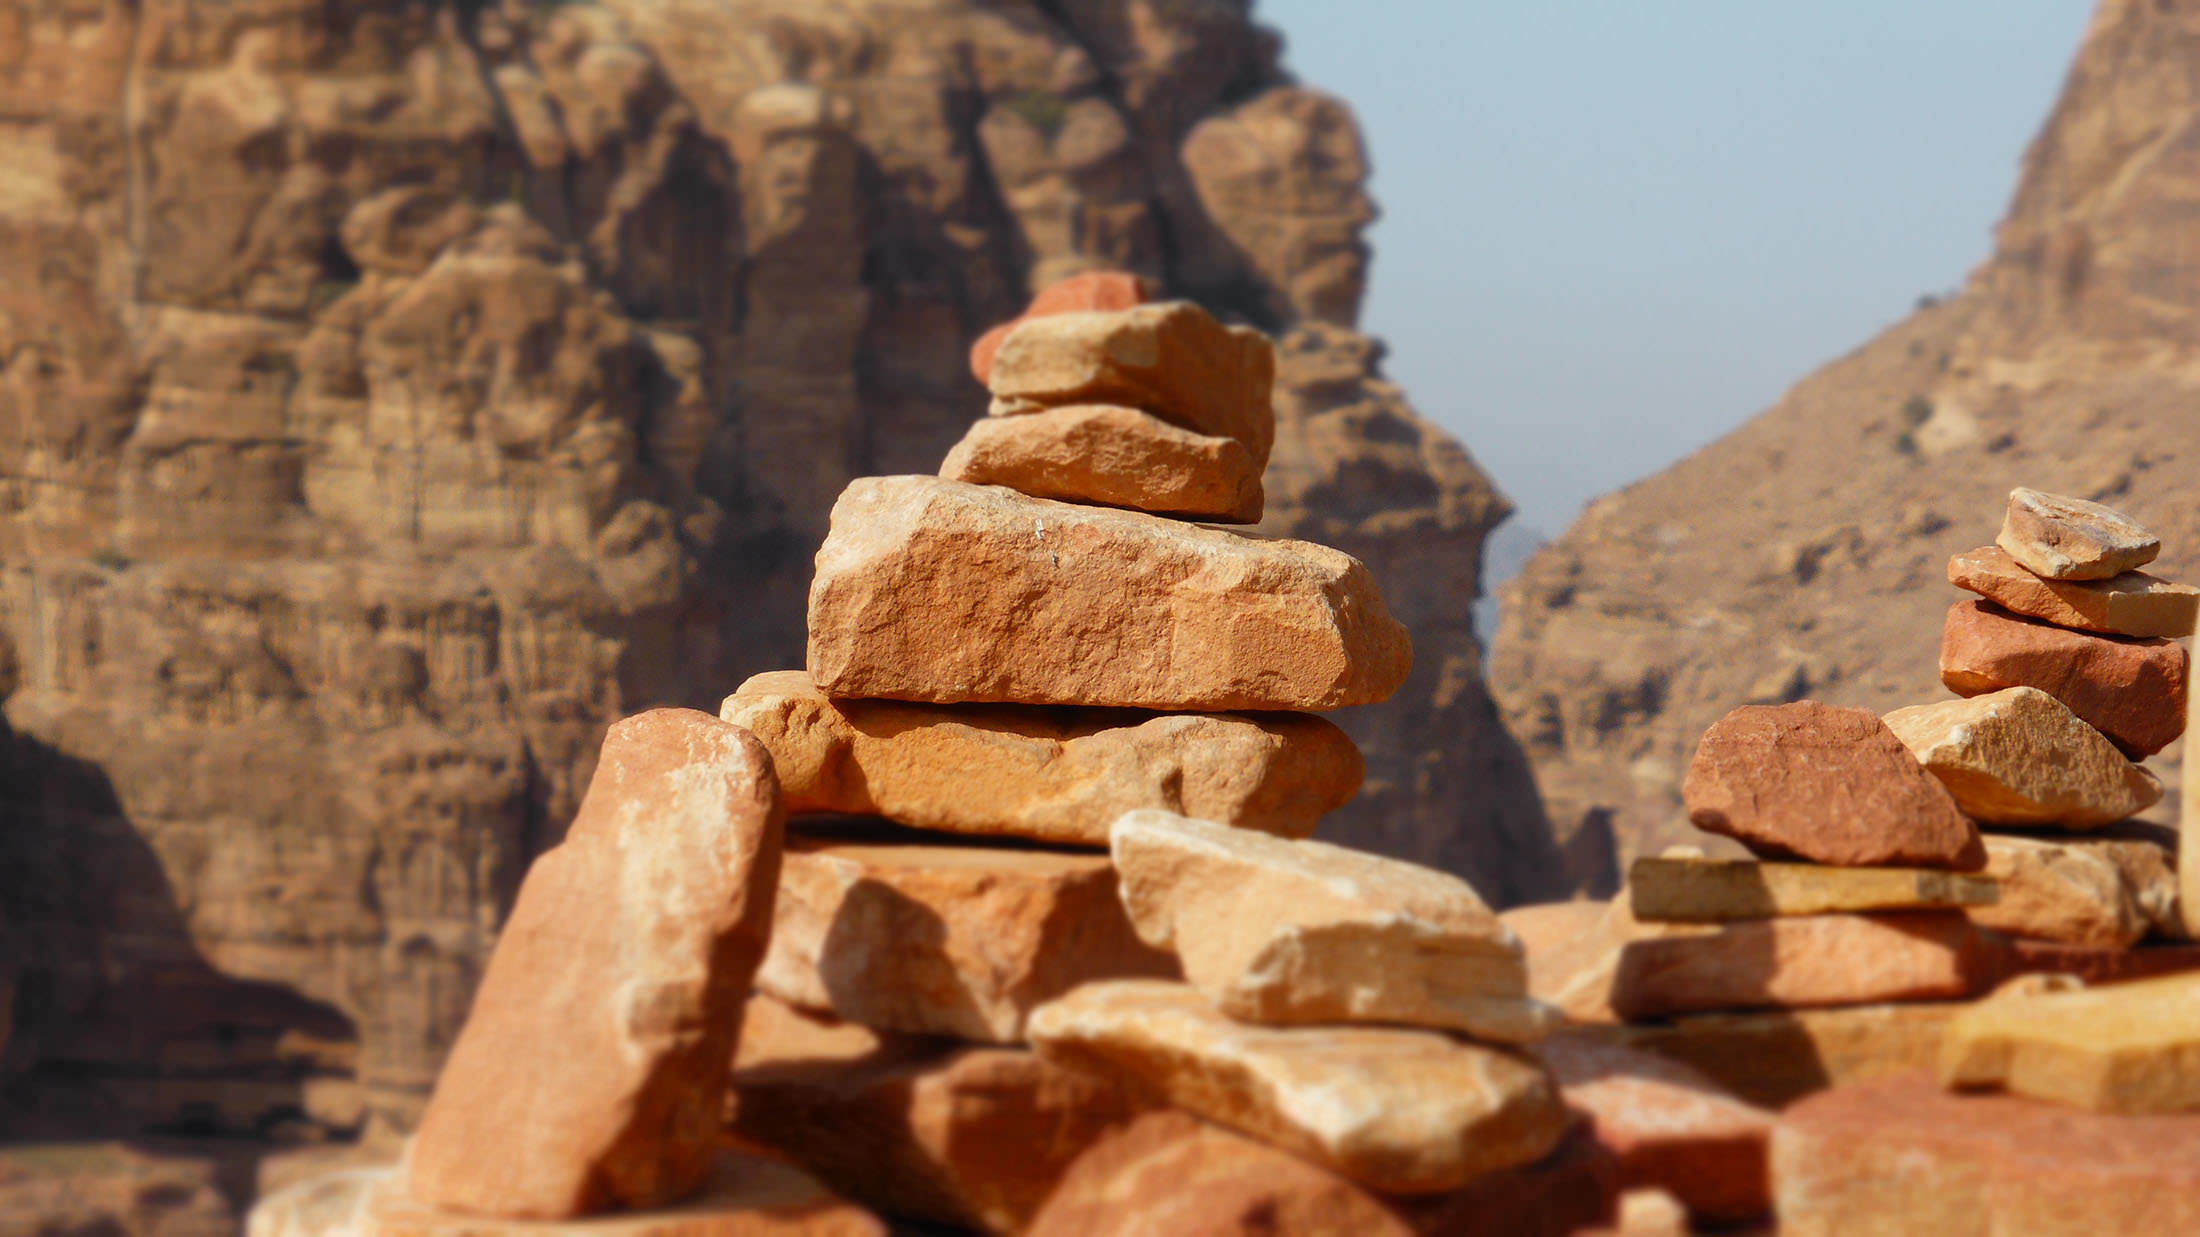 A collection of stones at the High Place of Sacrifice in Petra Jordan